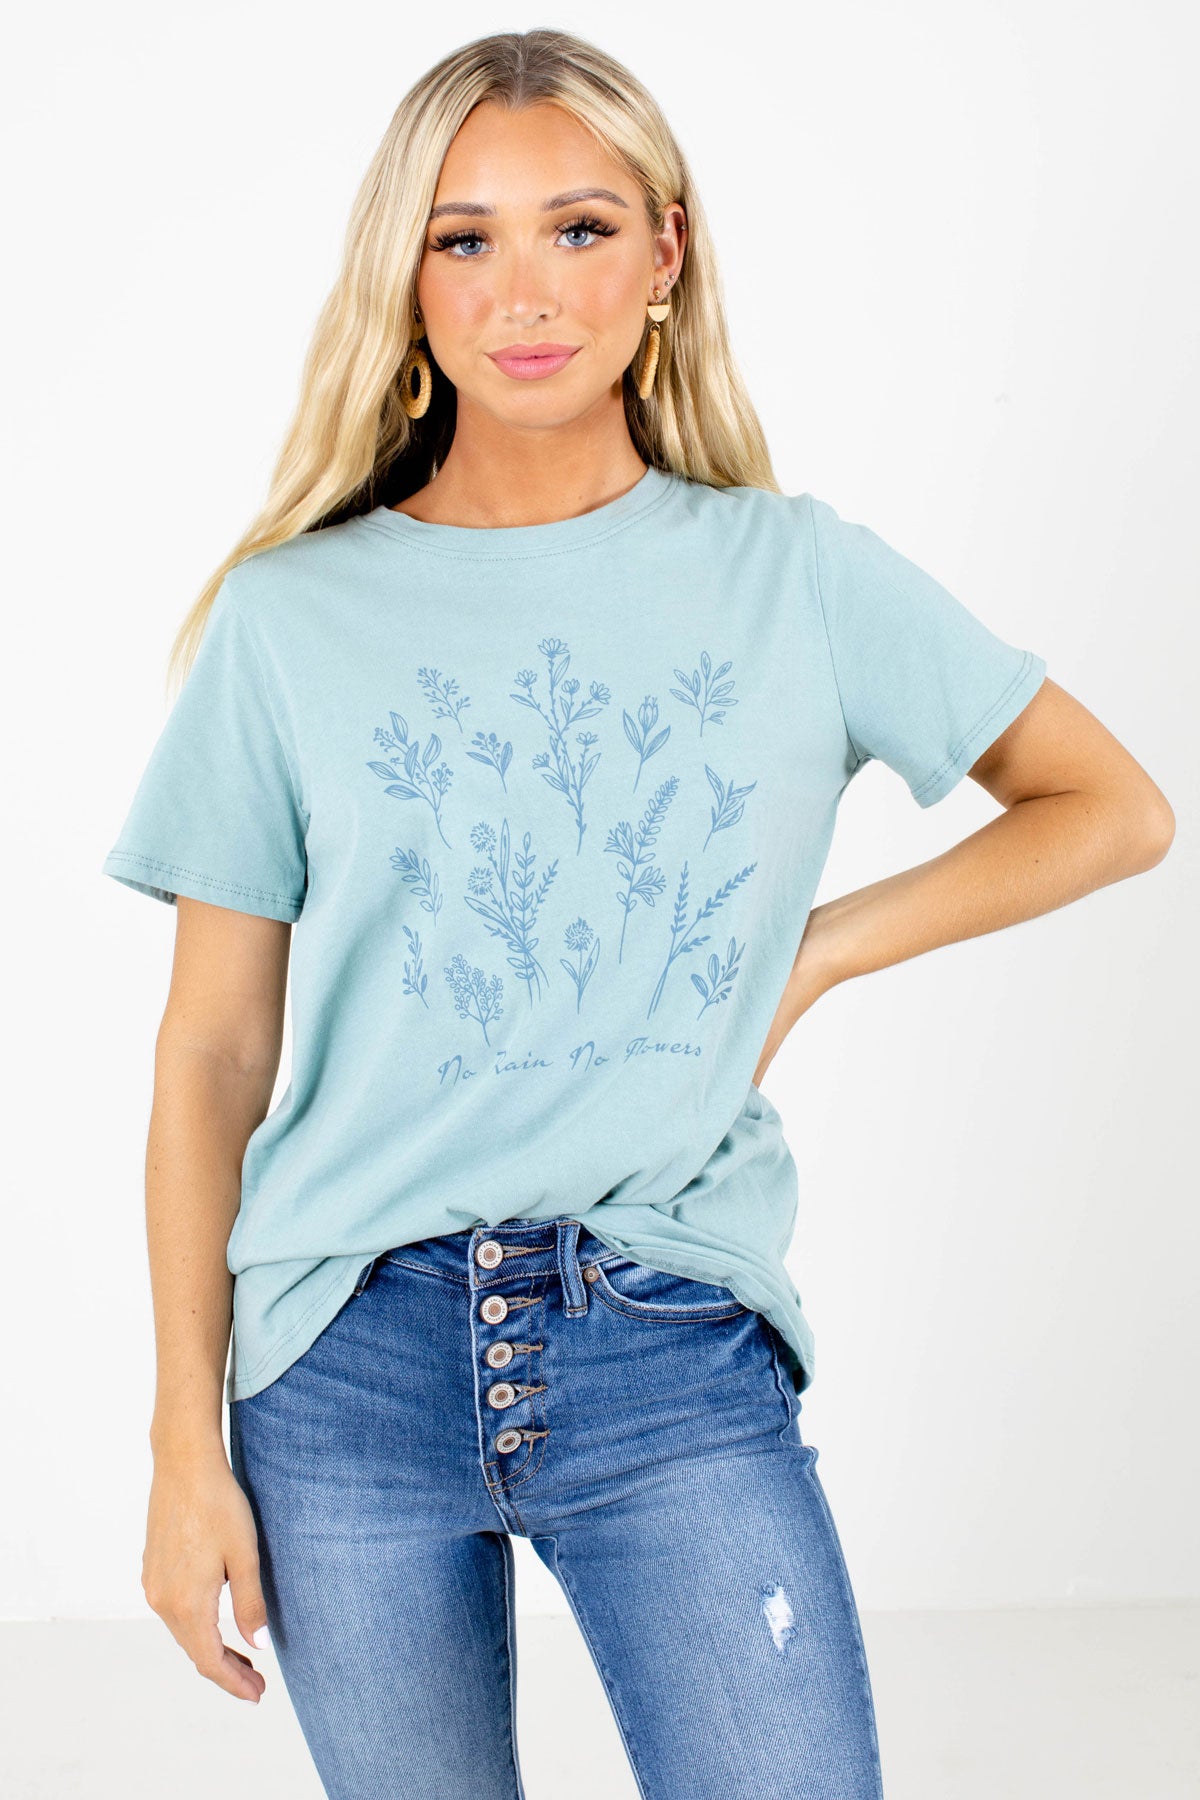 Blue Floral Graphic Boutique Tees for Women